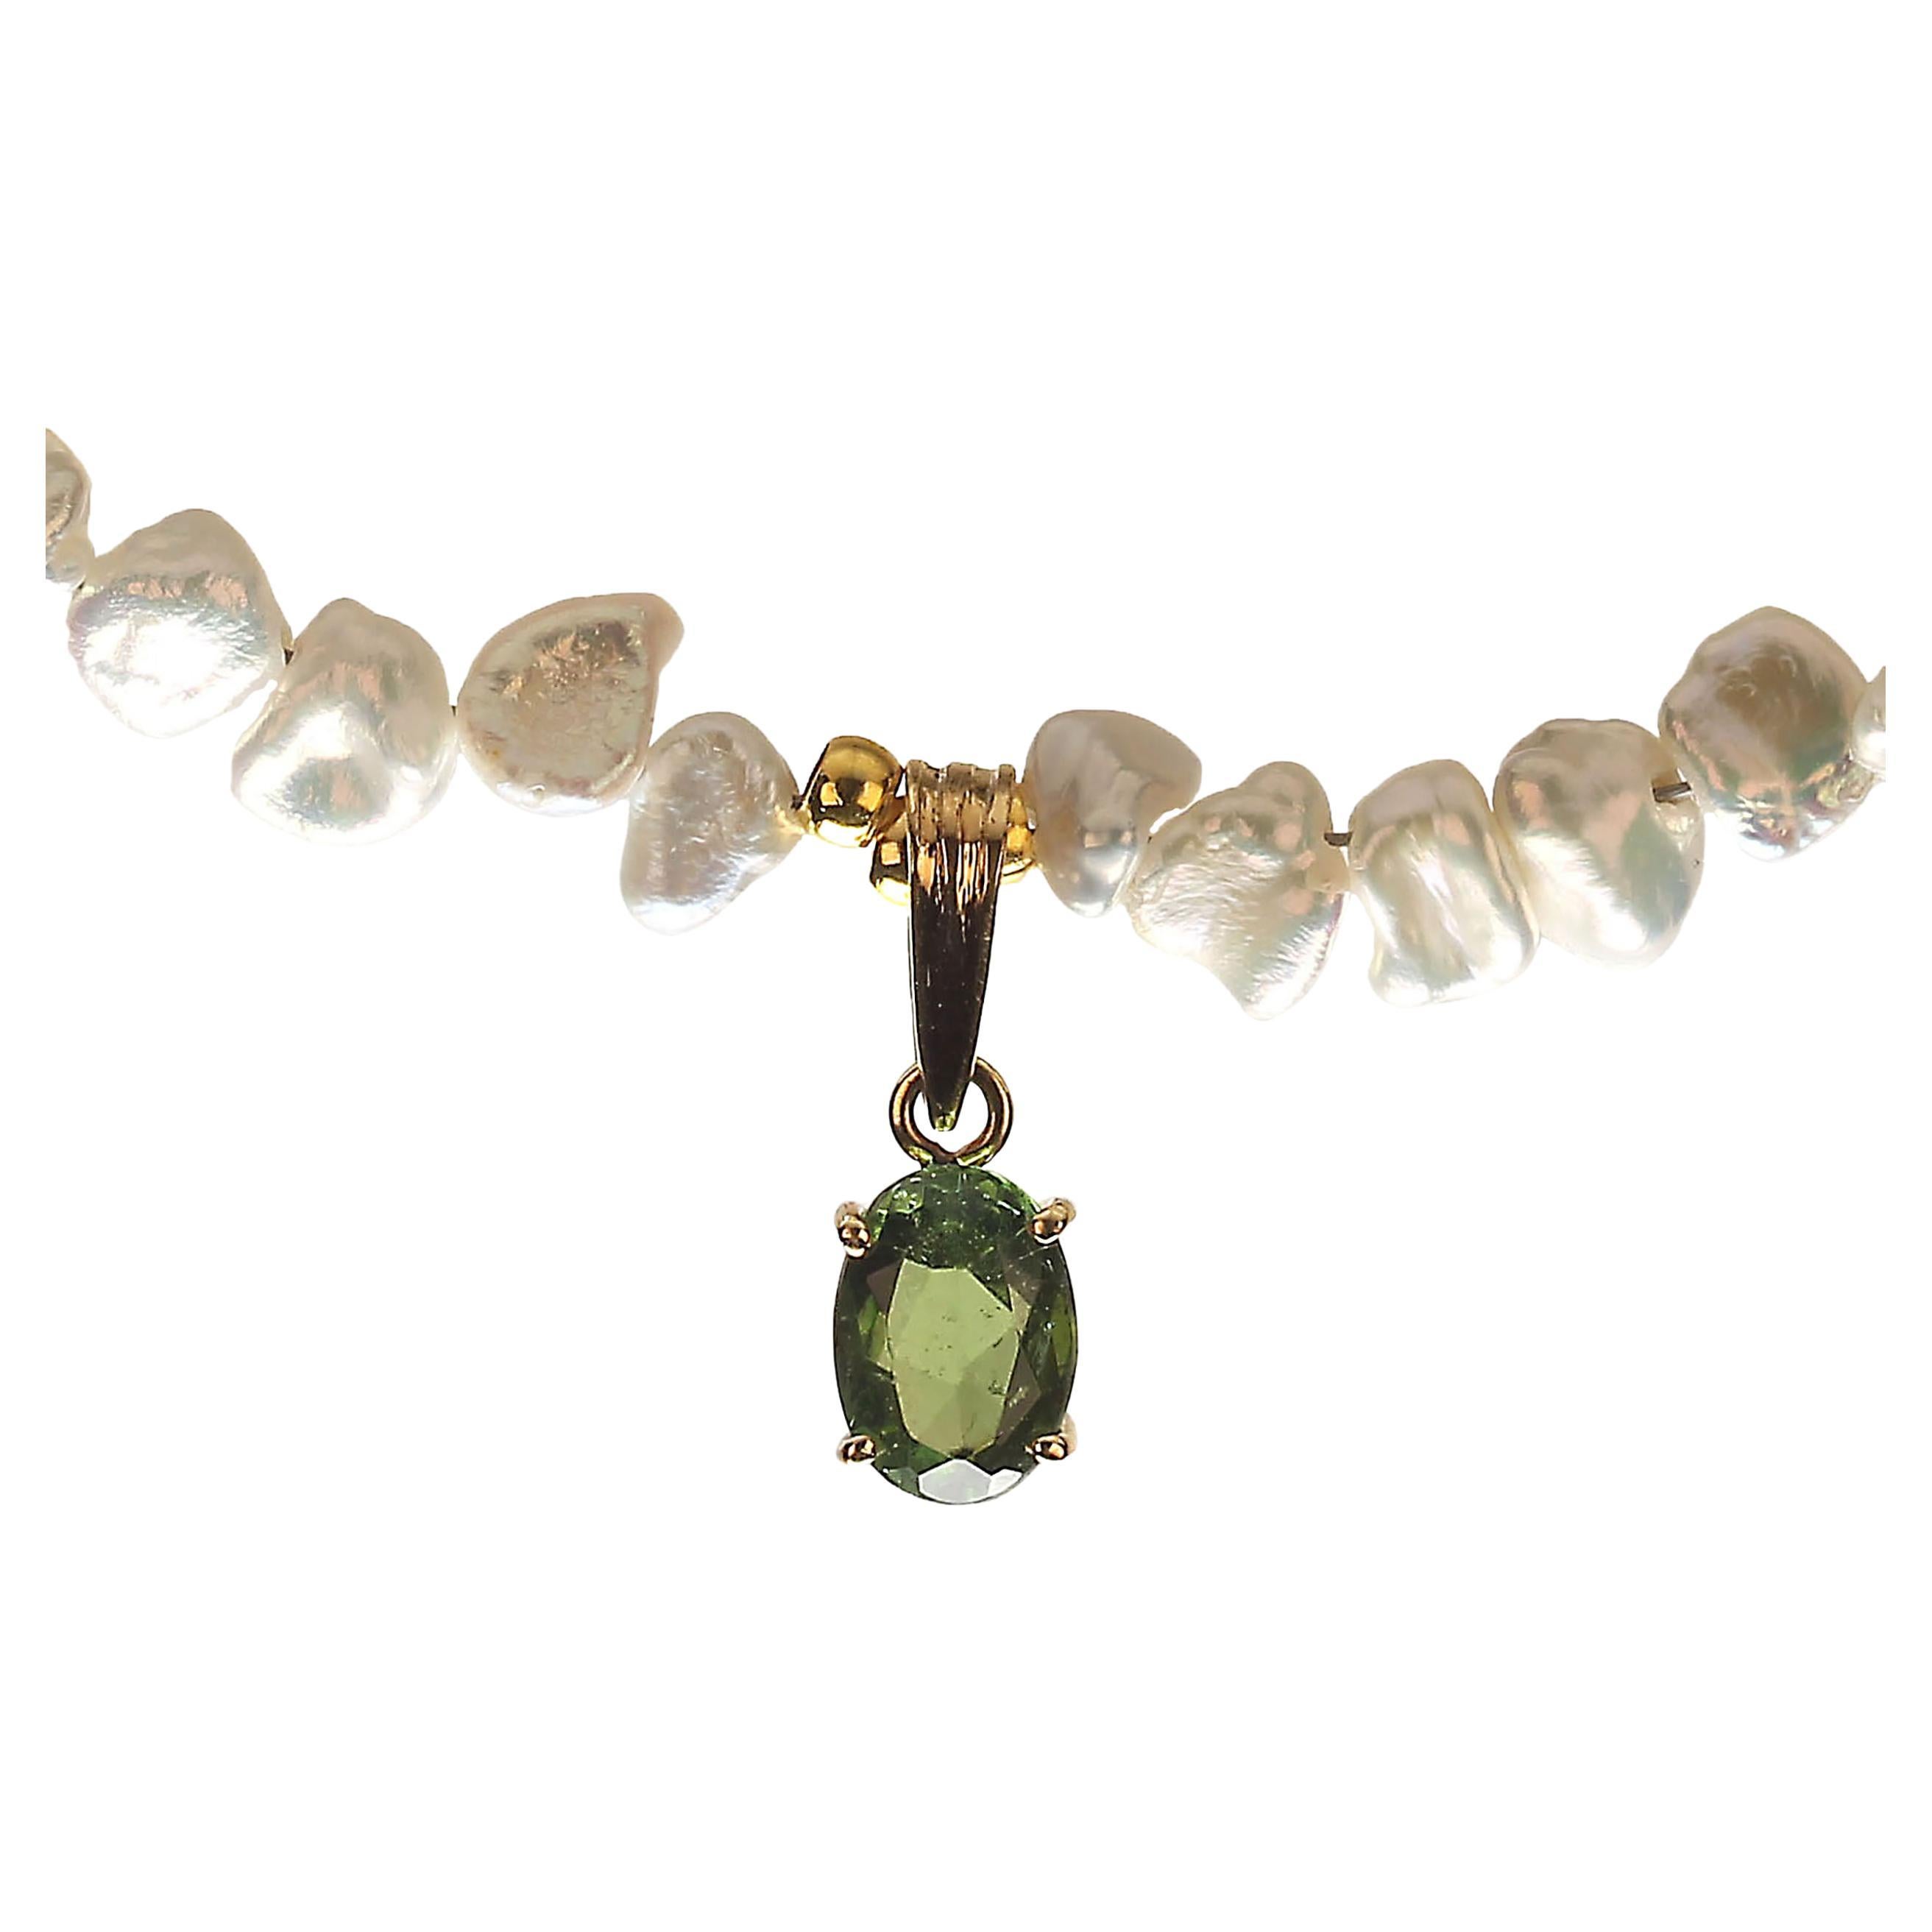 Artisan AJD Pearl Necklace with Green Tourmaline Pendant